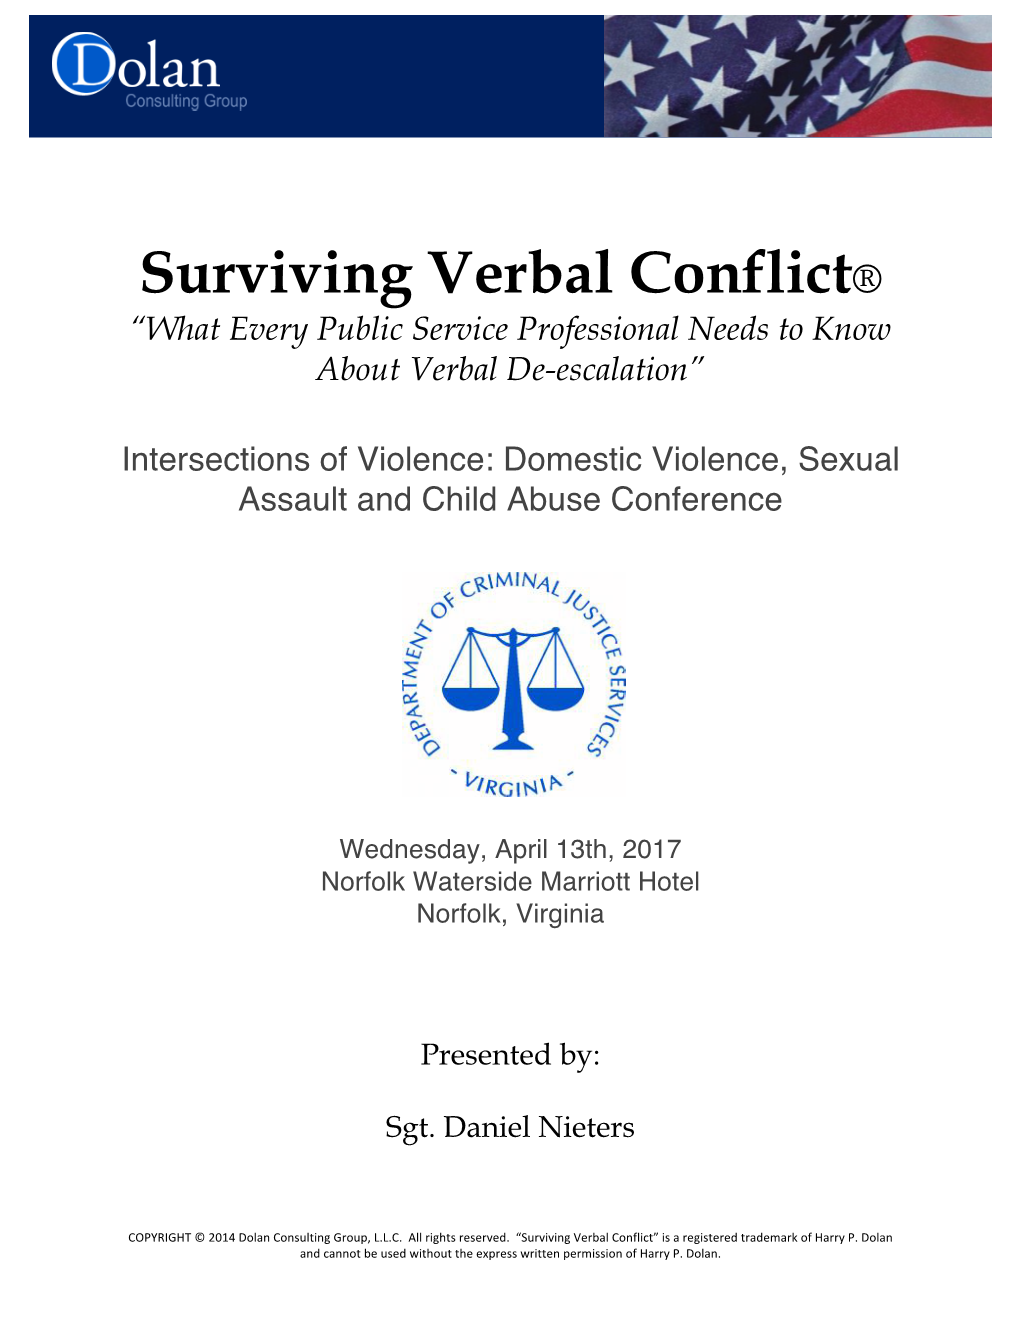 Surviving Verbal Conflict® “What Every Public Service Professional Needs to Know About Verbal De-Escalation”